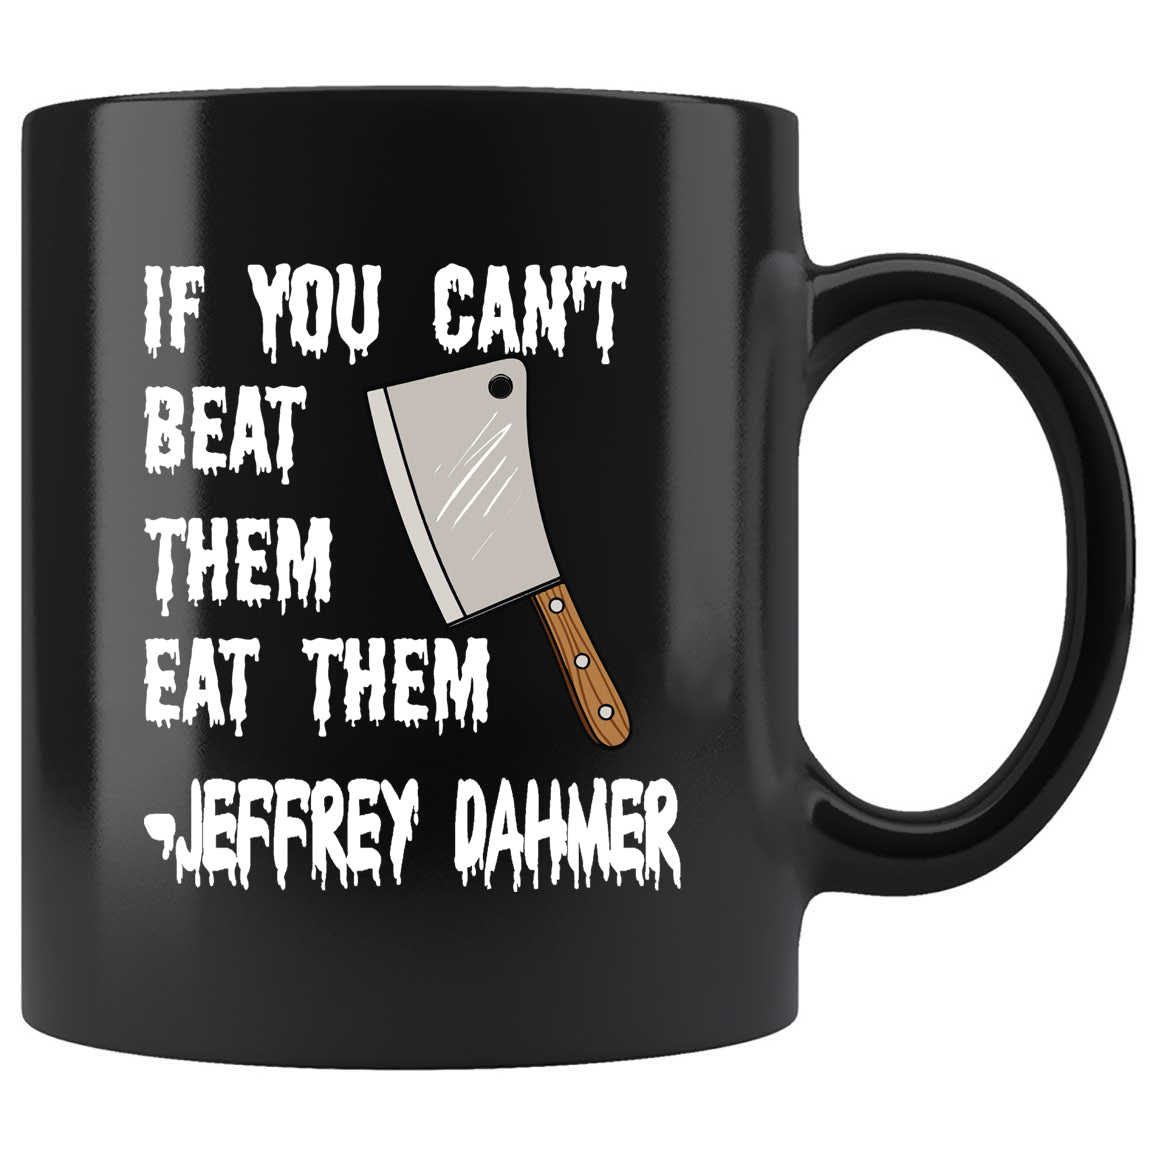 If You Can't Beat Them Eat Them Skitongifts Funny Ceramic Coffee Mug For Birthday, Mother's Day, Father's Day, Christmas